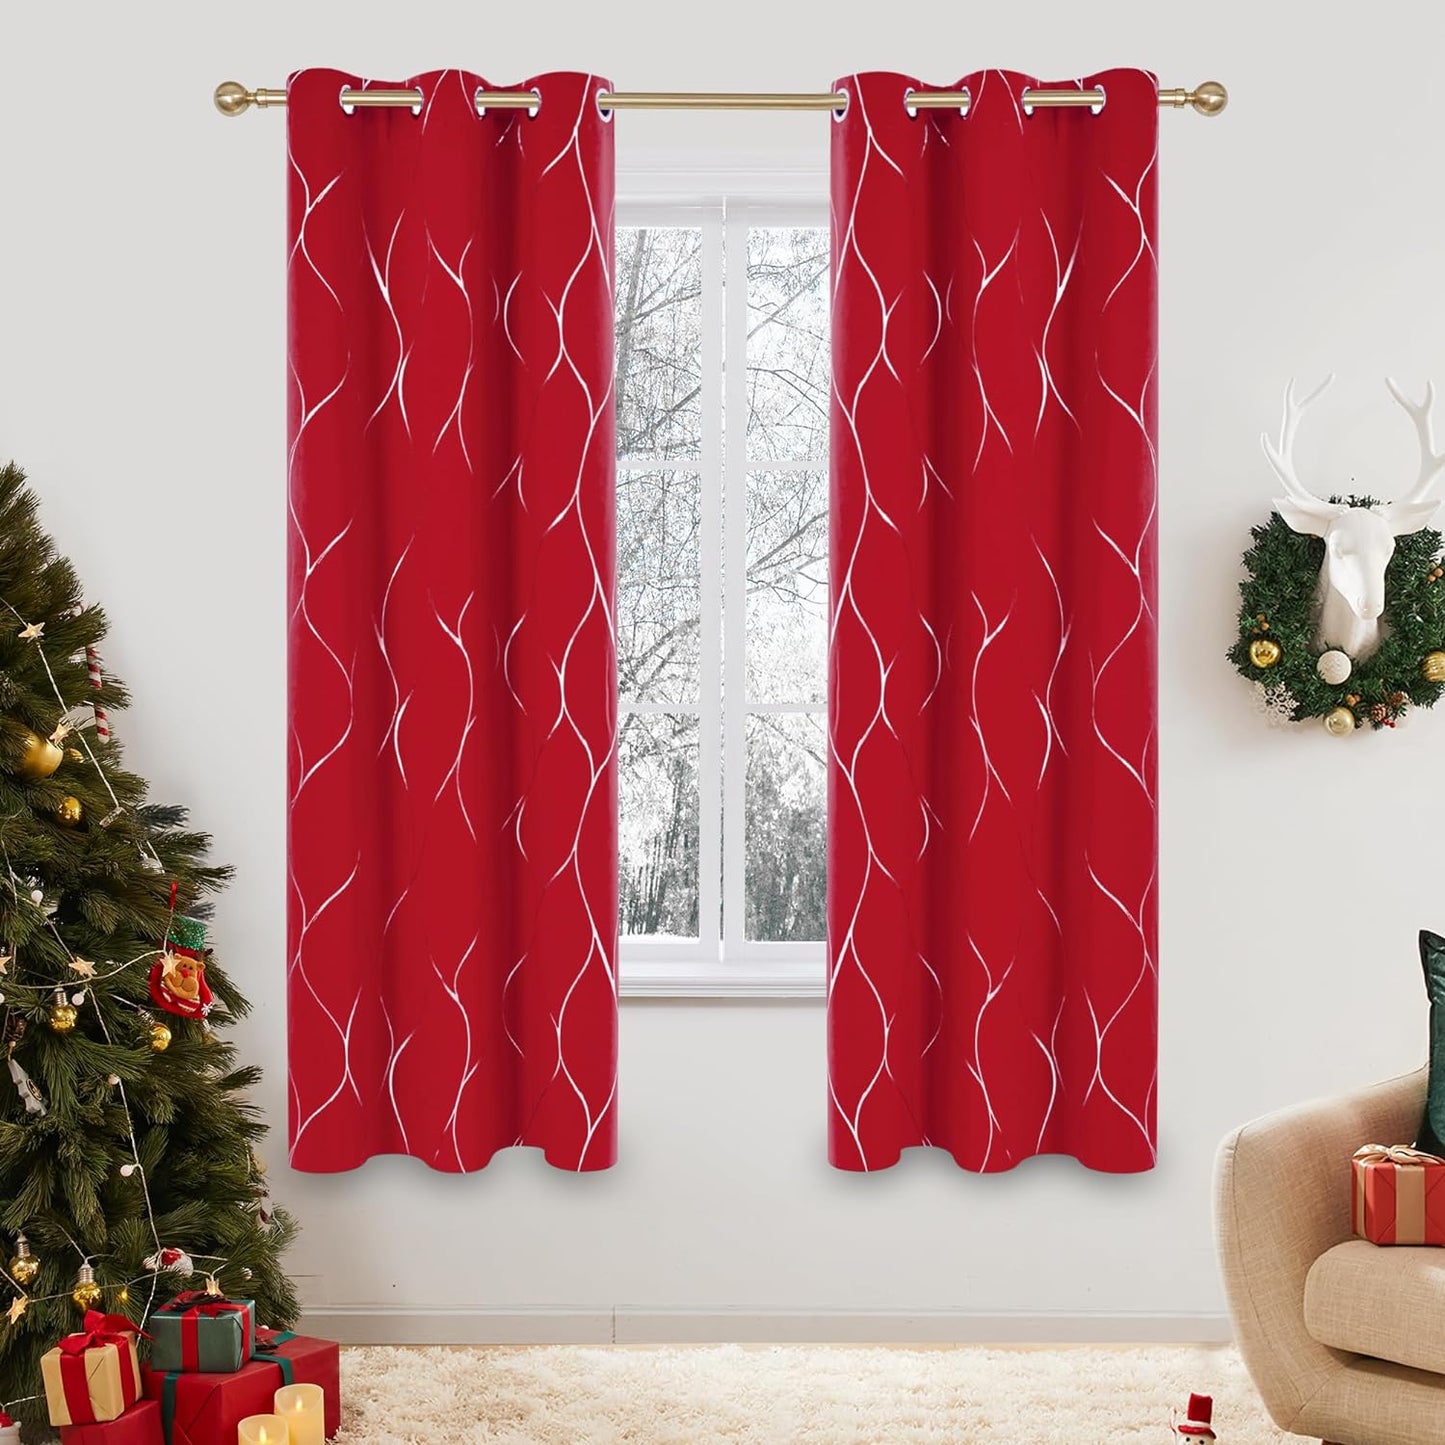 Deconovo Blackout Curtains with Foil Wave Pattern, Grommet Curtain Room Darkening Window Panels, Thermal Insulated Curtain Drapes for Nursery Room (42W X 54L Inch, 2 Panels, Turquoise)  DECONOVO Red W42 X L72 